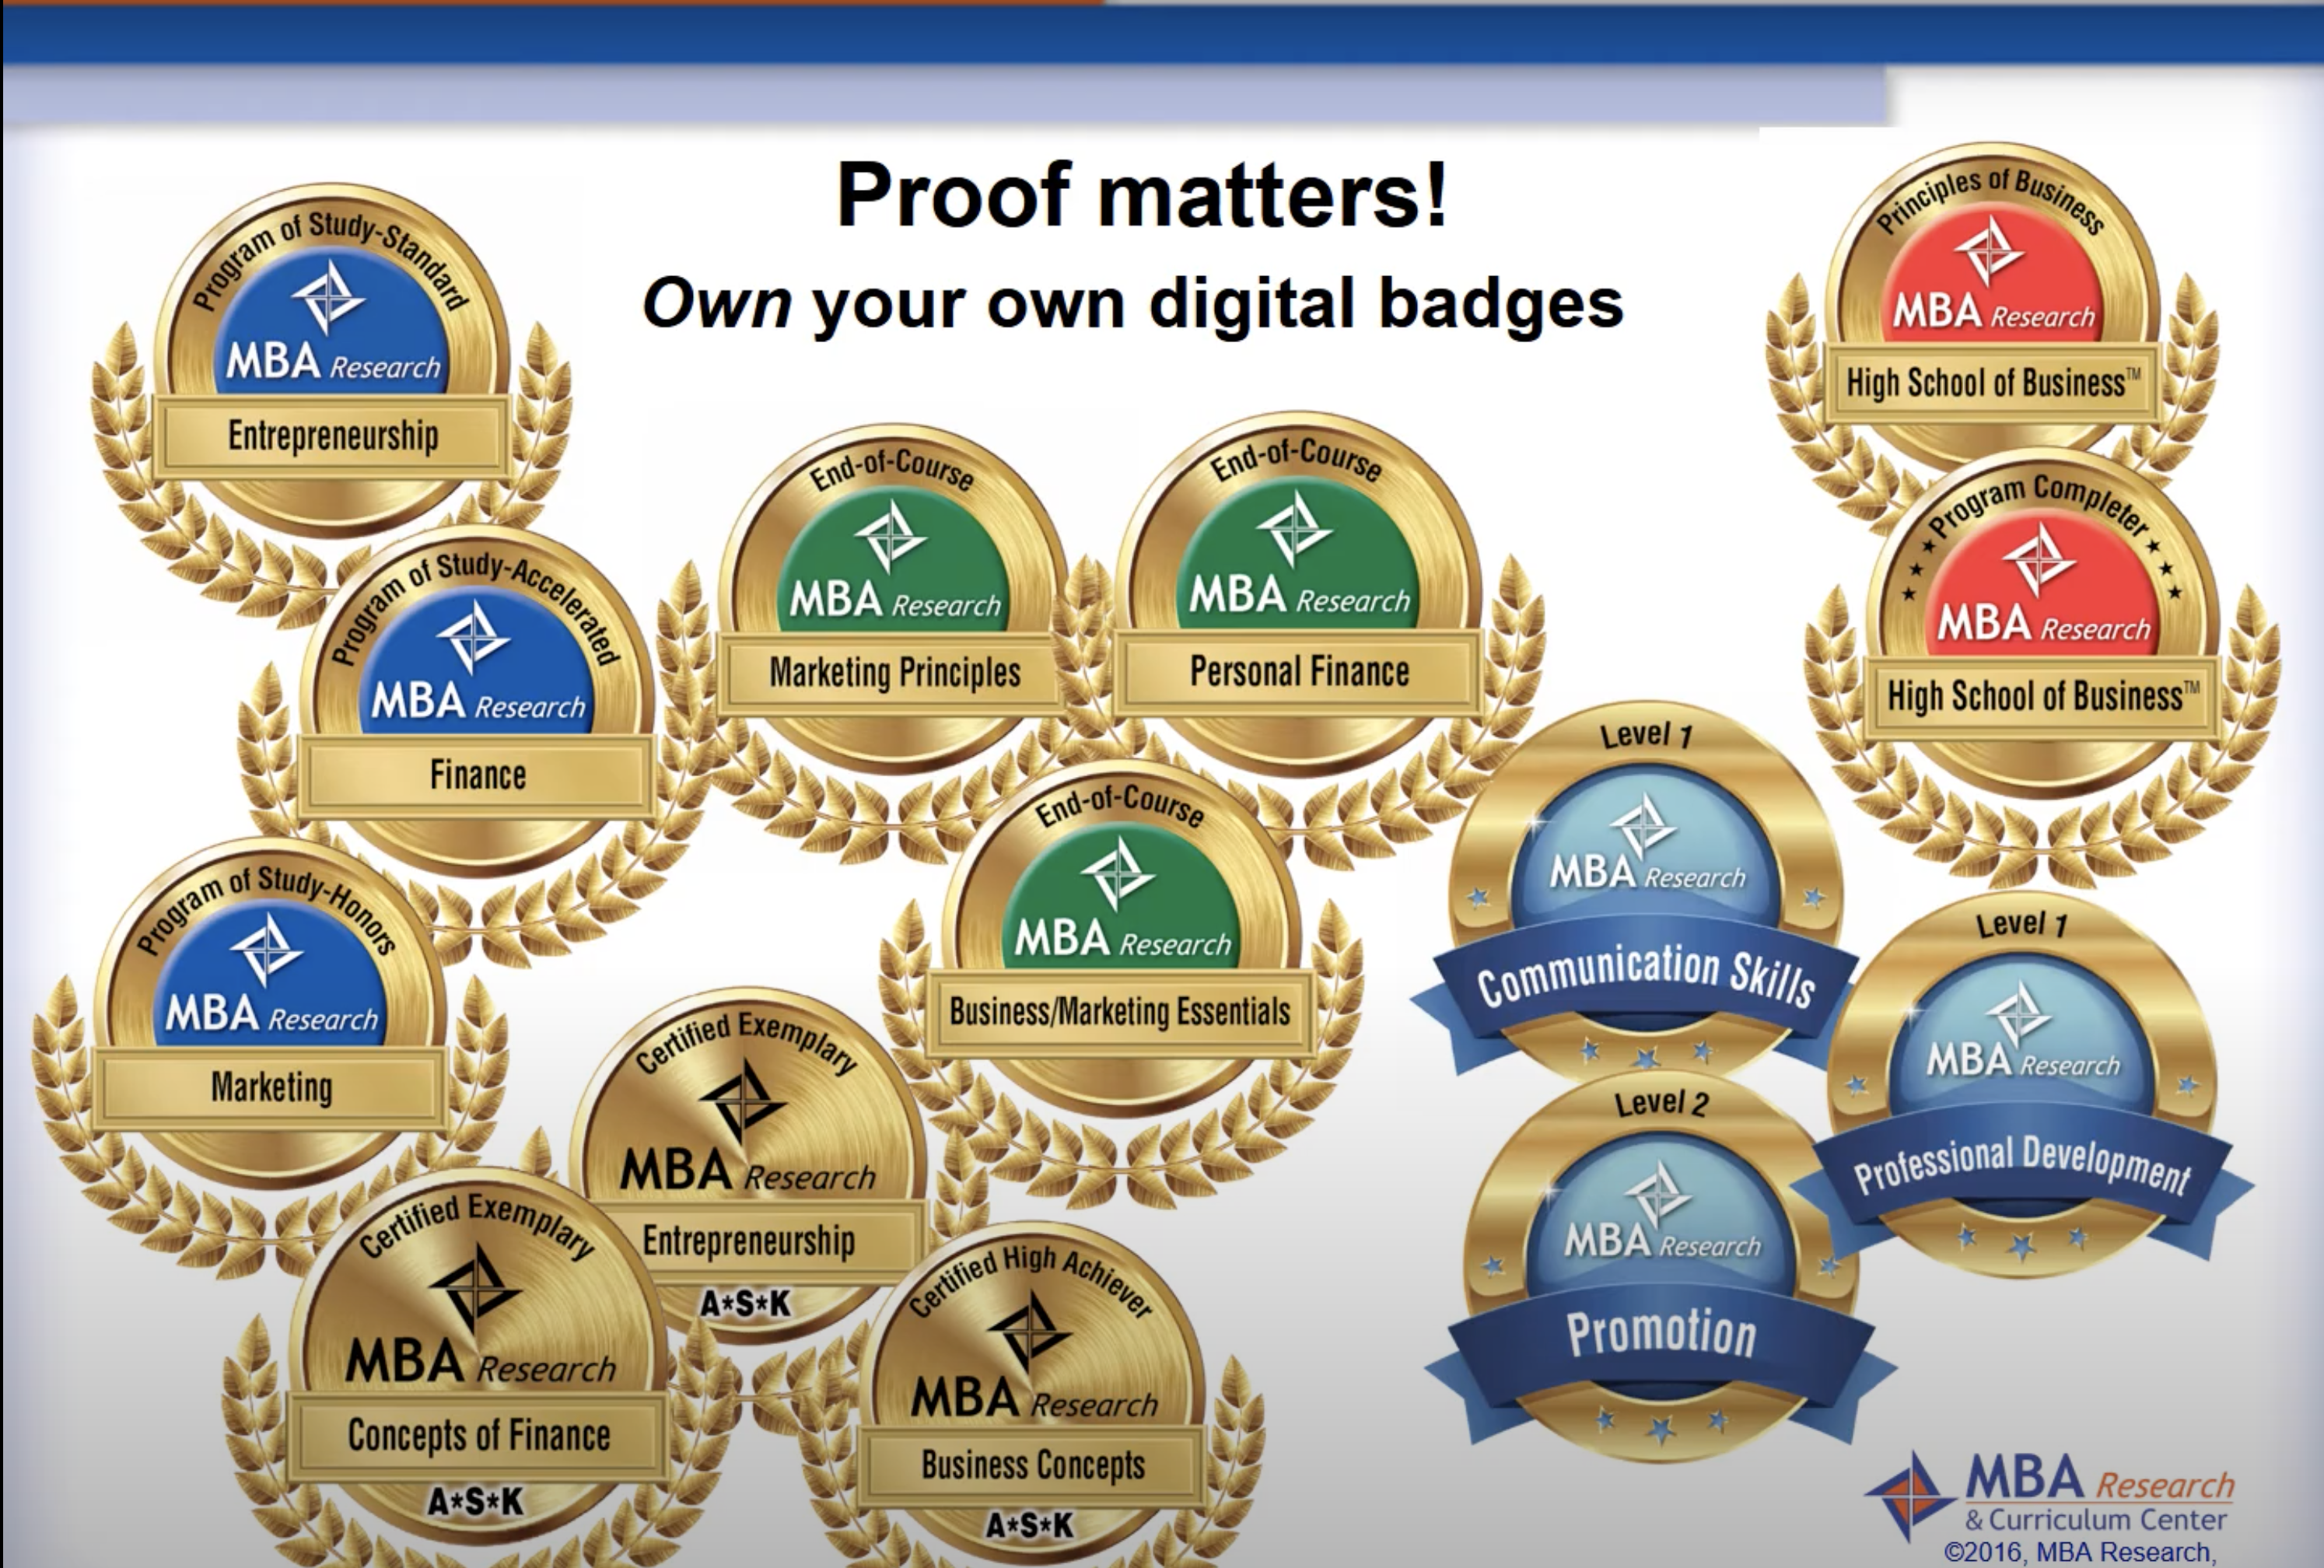 What Are The Different Types of Badging Pathways?